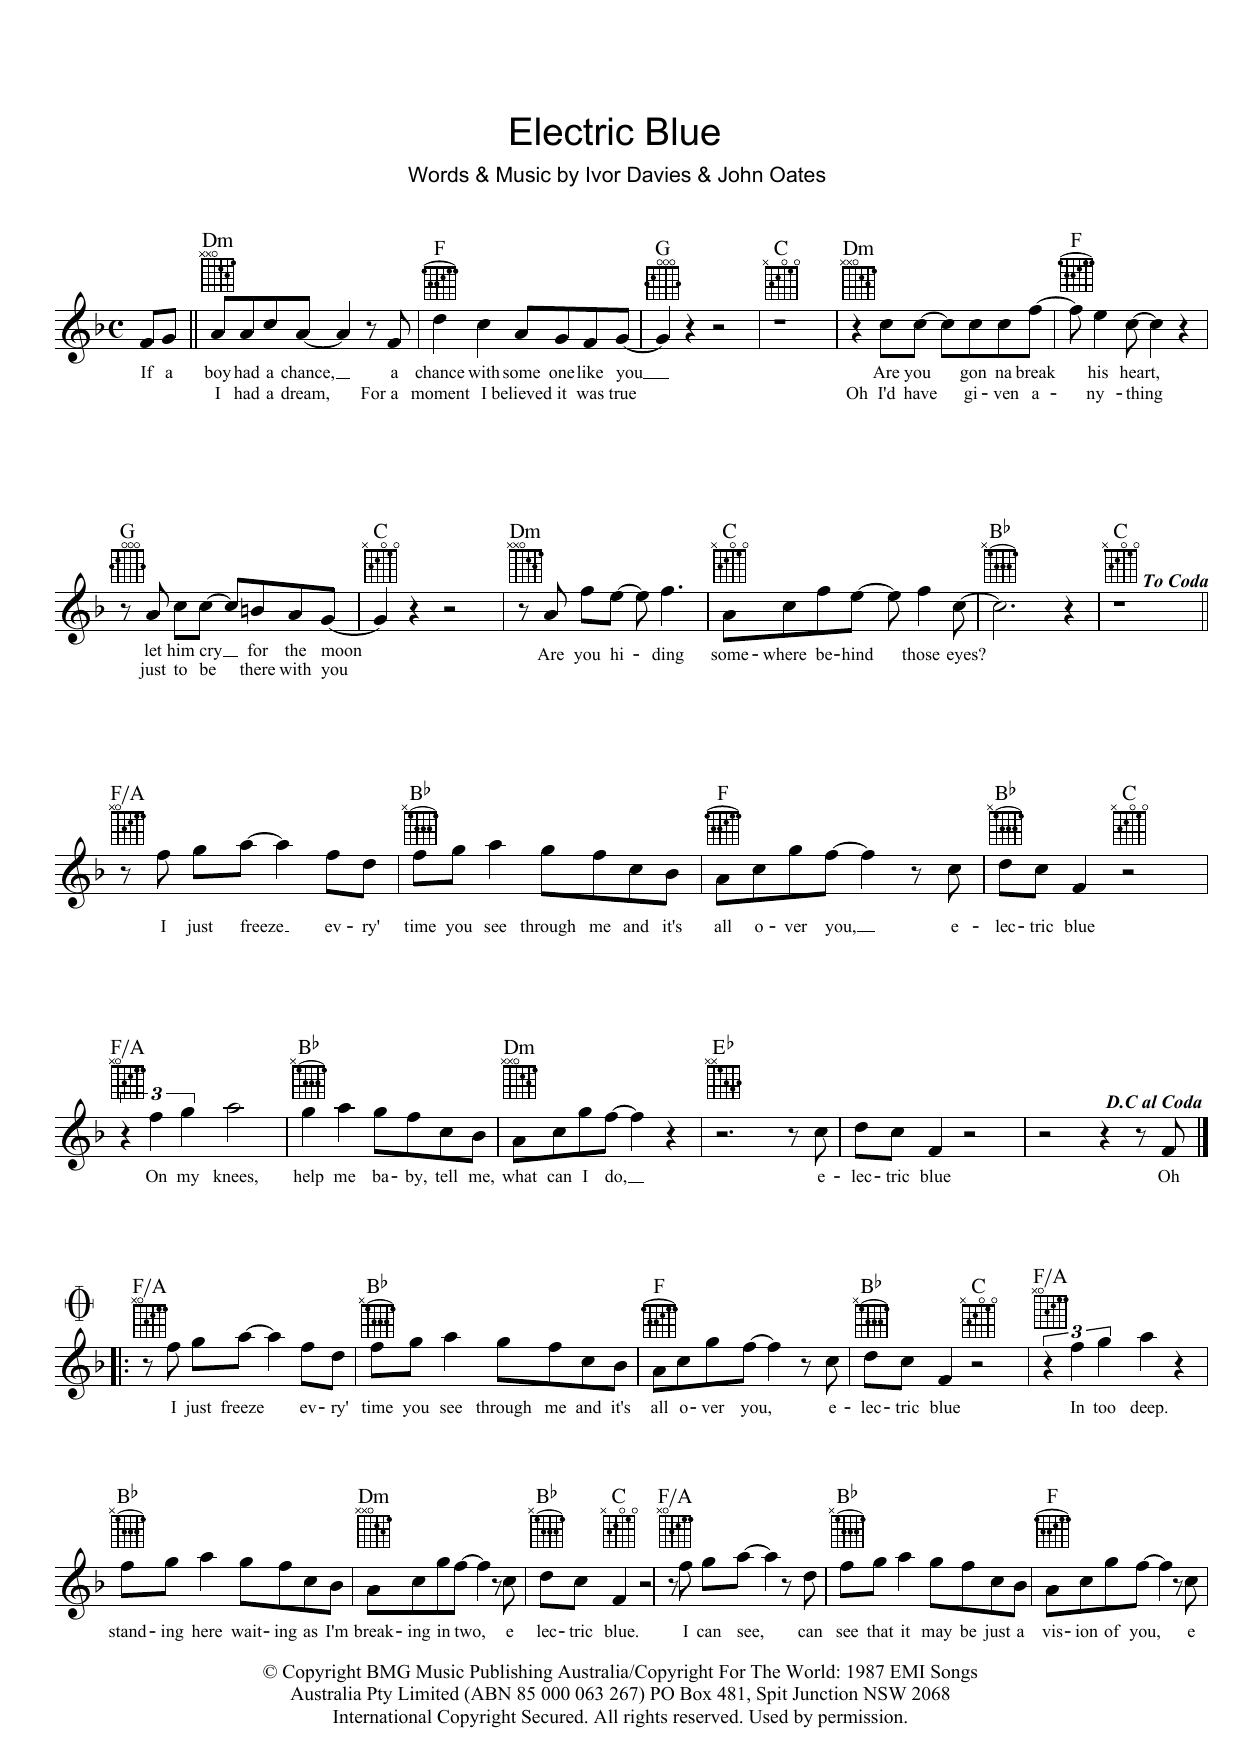 Download Icehouse Electric Blue Sheet Music